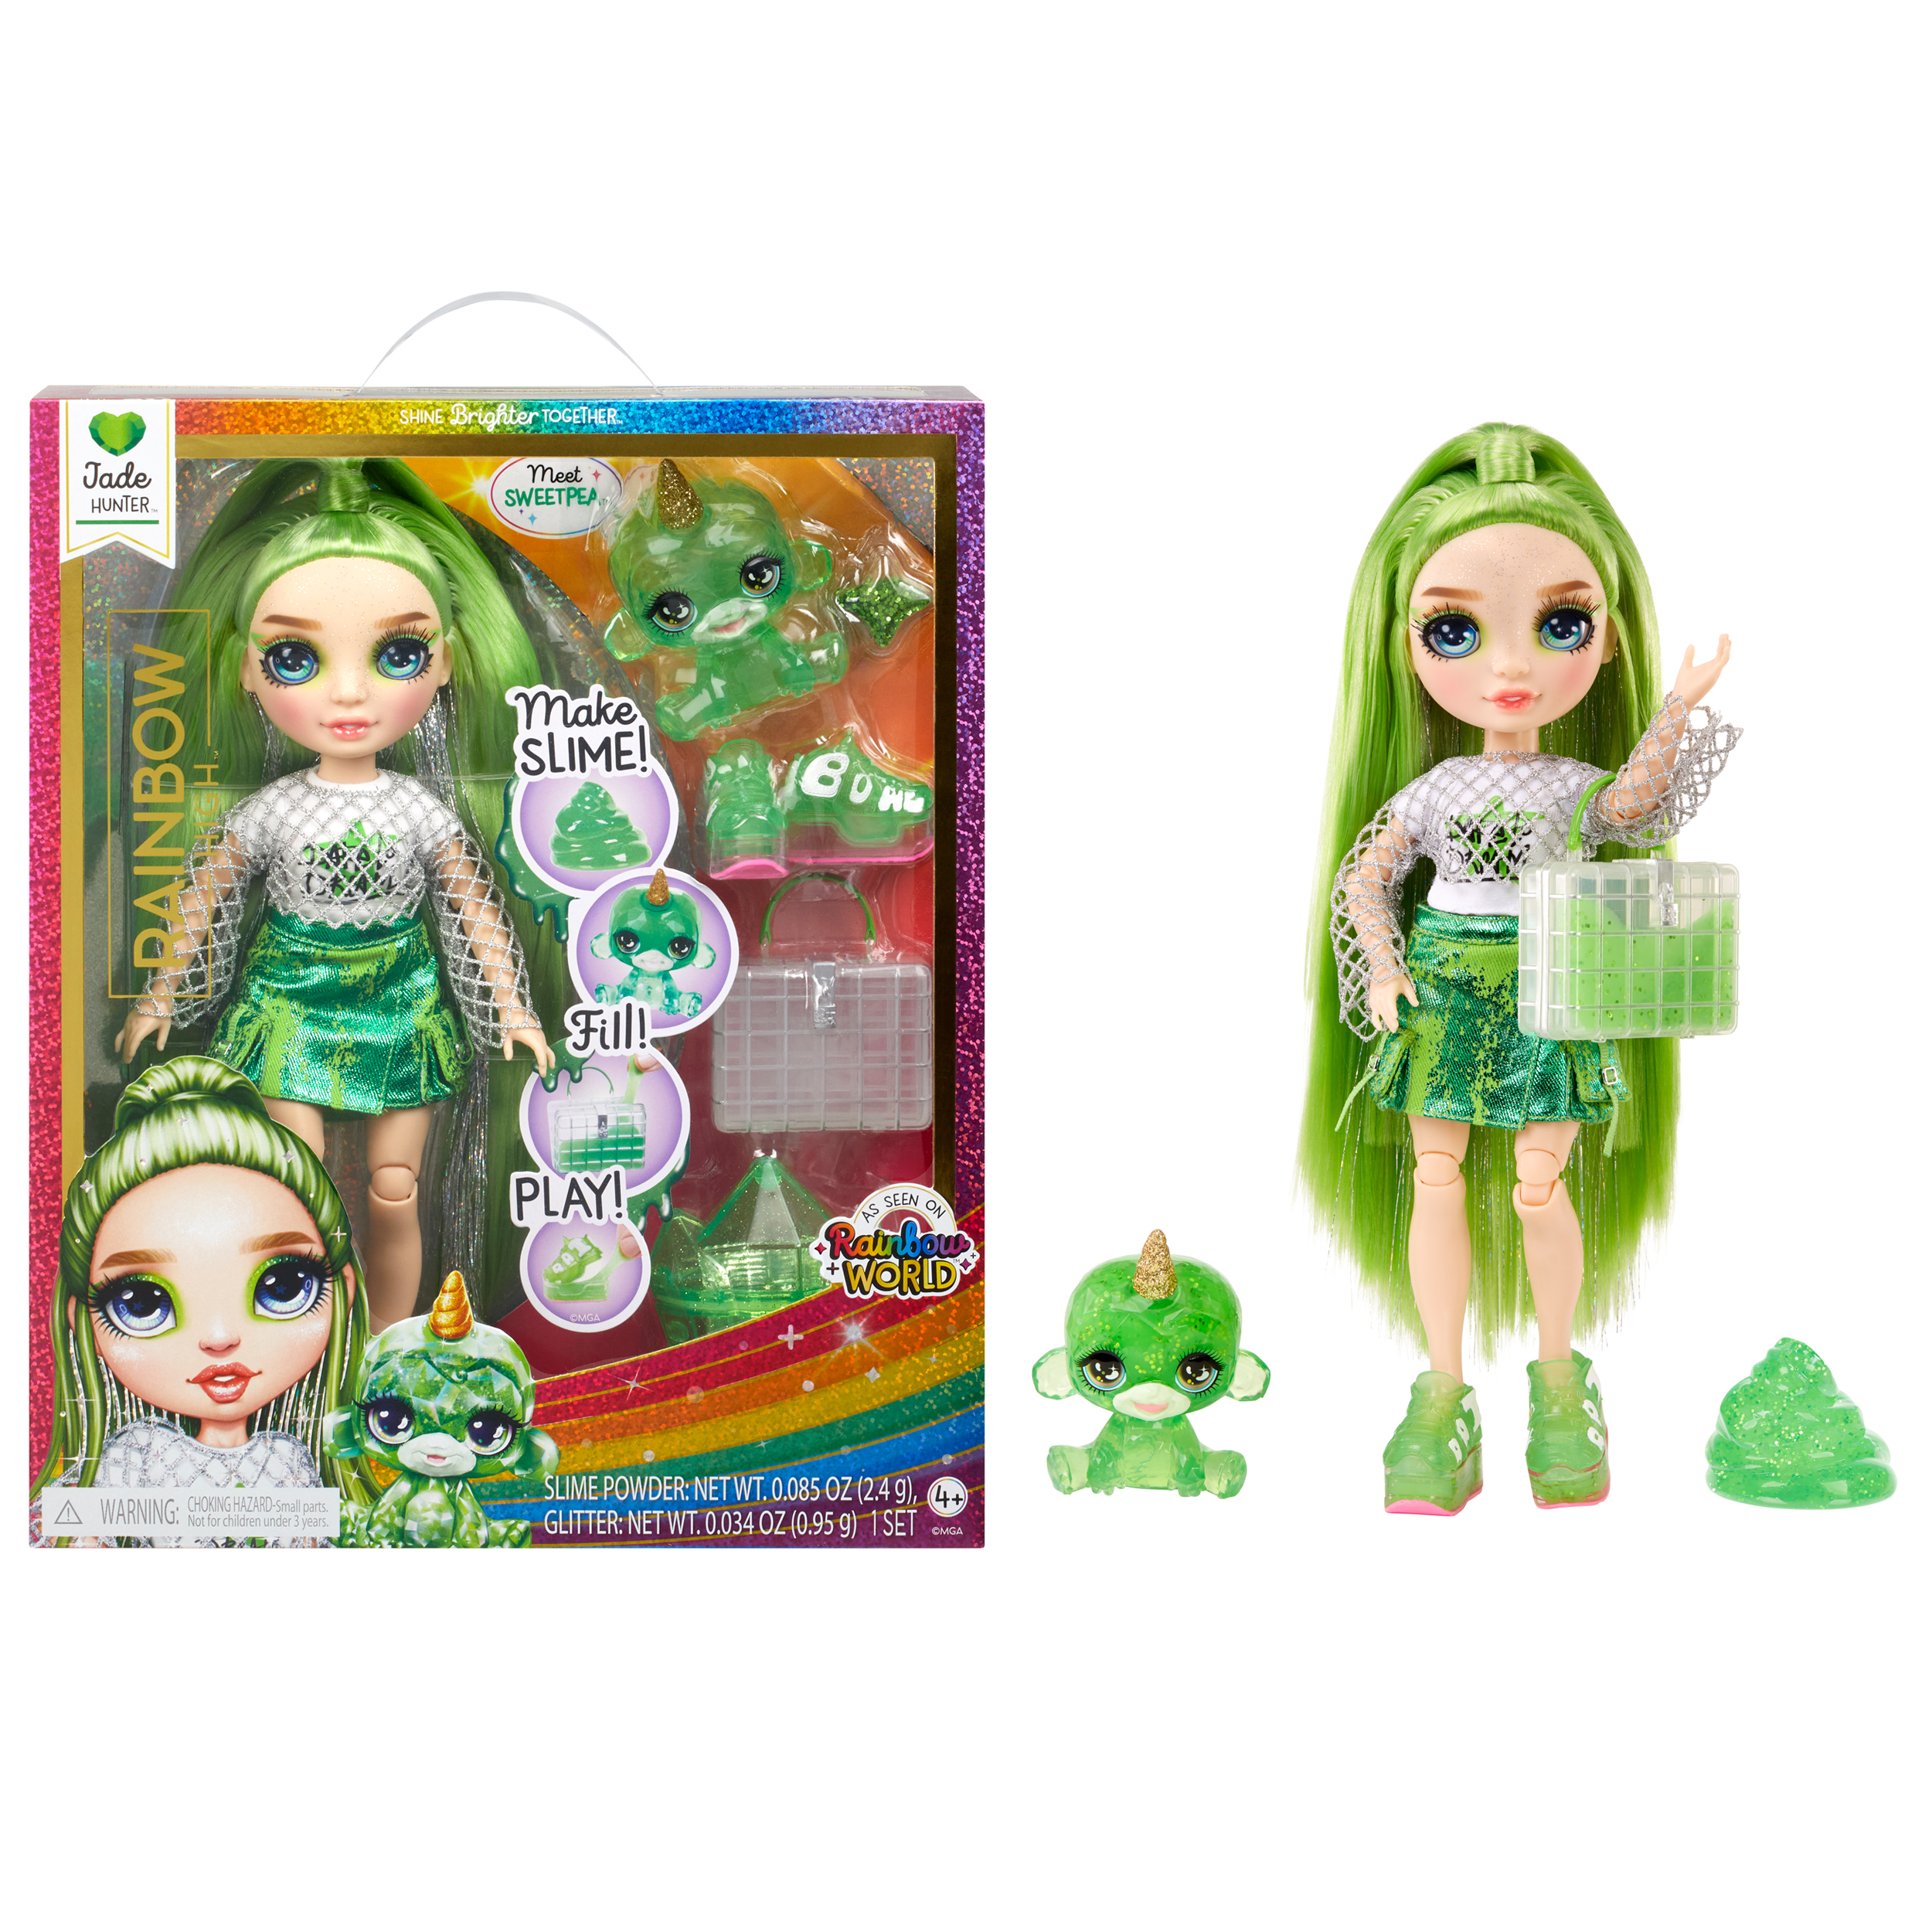 Rainbow High Jade, Green with Yeti Pet, 11” Doll, DIY Sparkle Slime Kit, Fashion Accessories, Kids Gift 4-12 - image 1 of 9